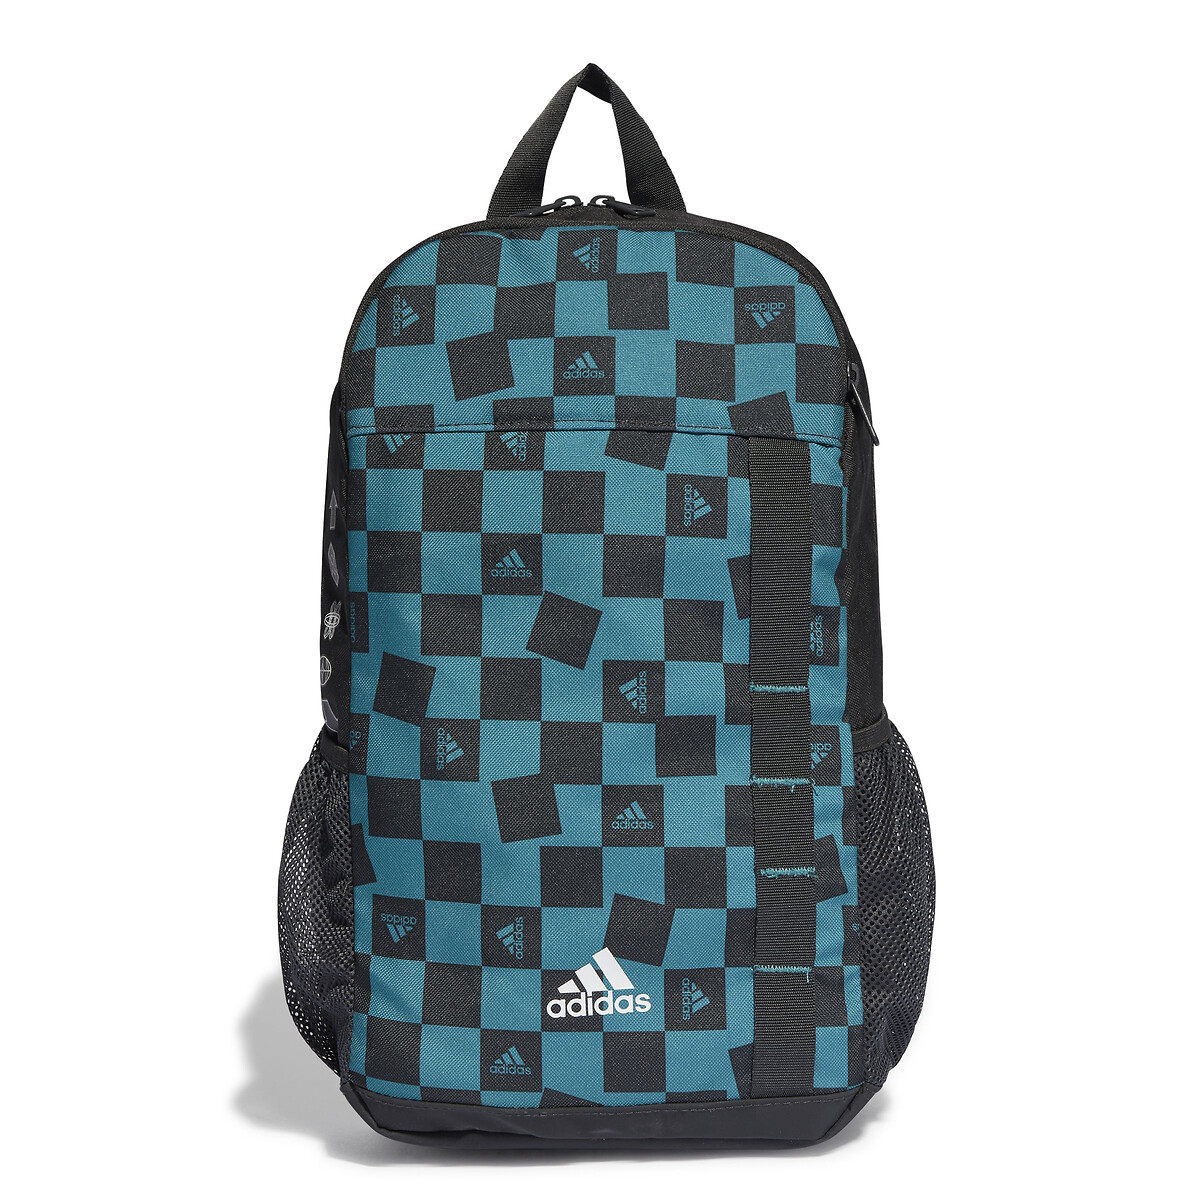 Image of Arkd3 Backpack